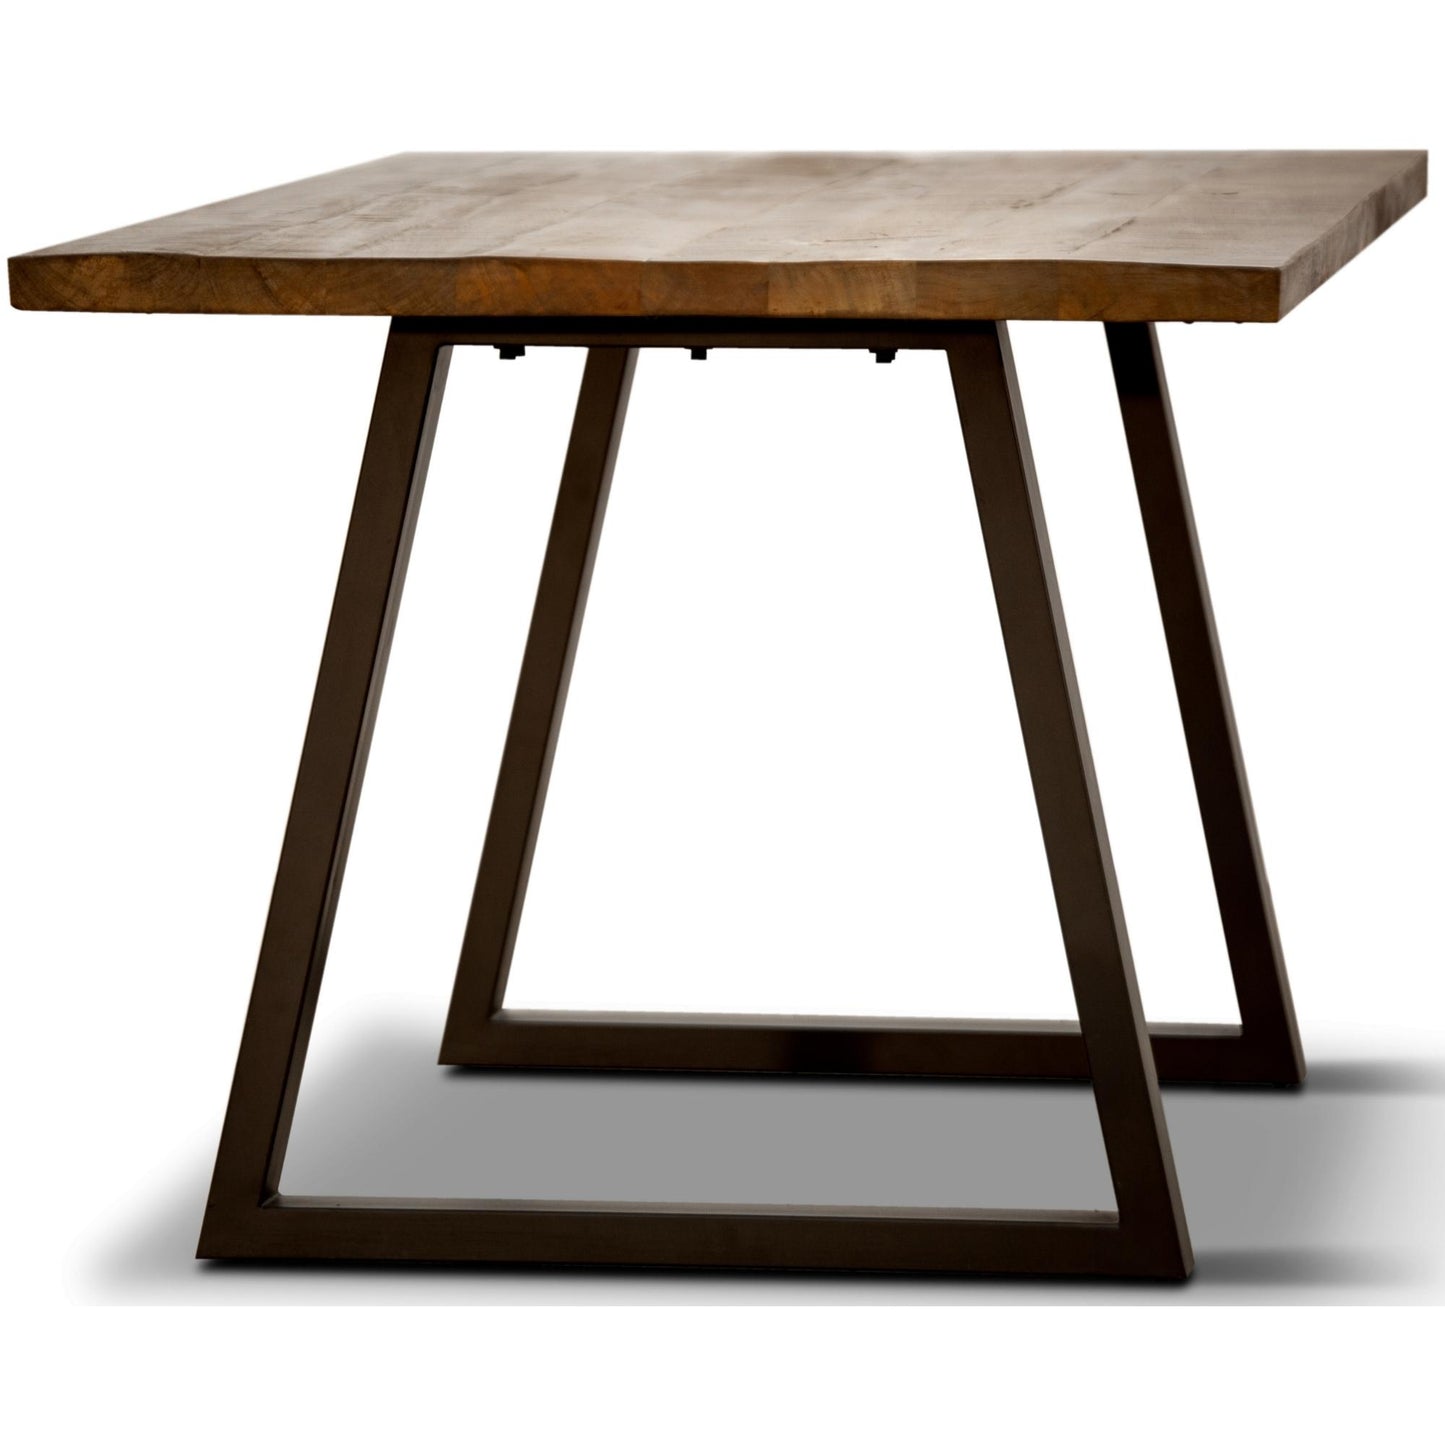 Begonia Live Edge Solid Mango Wood Dining Table 220cm